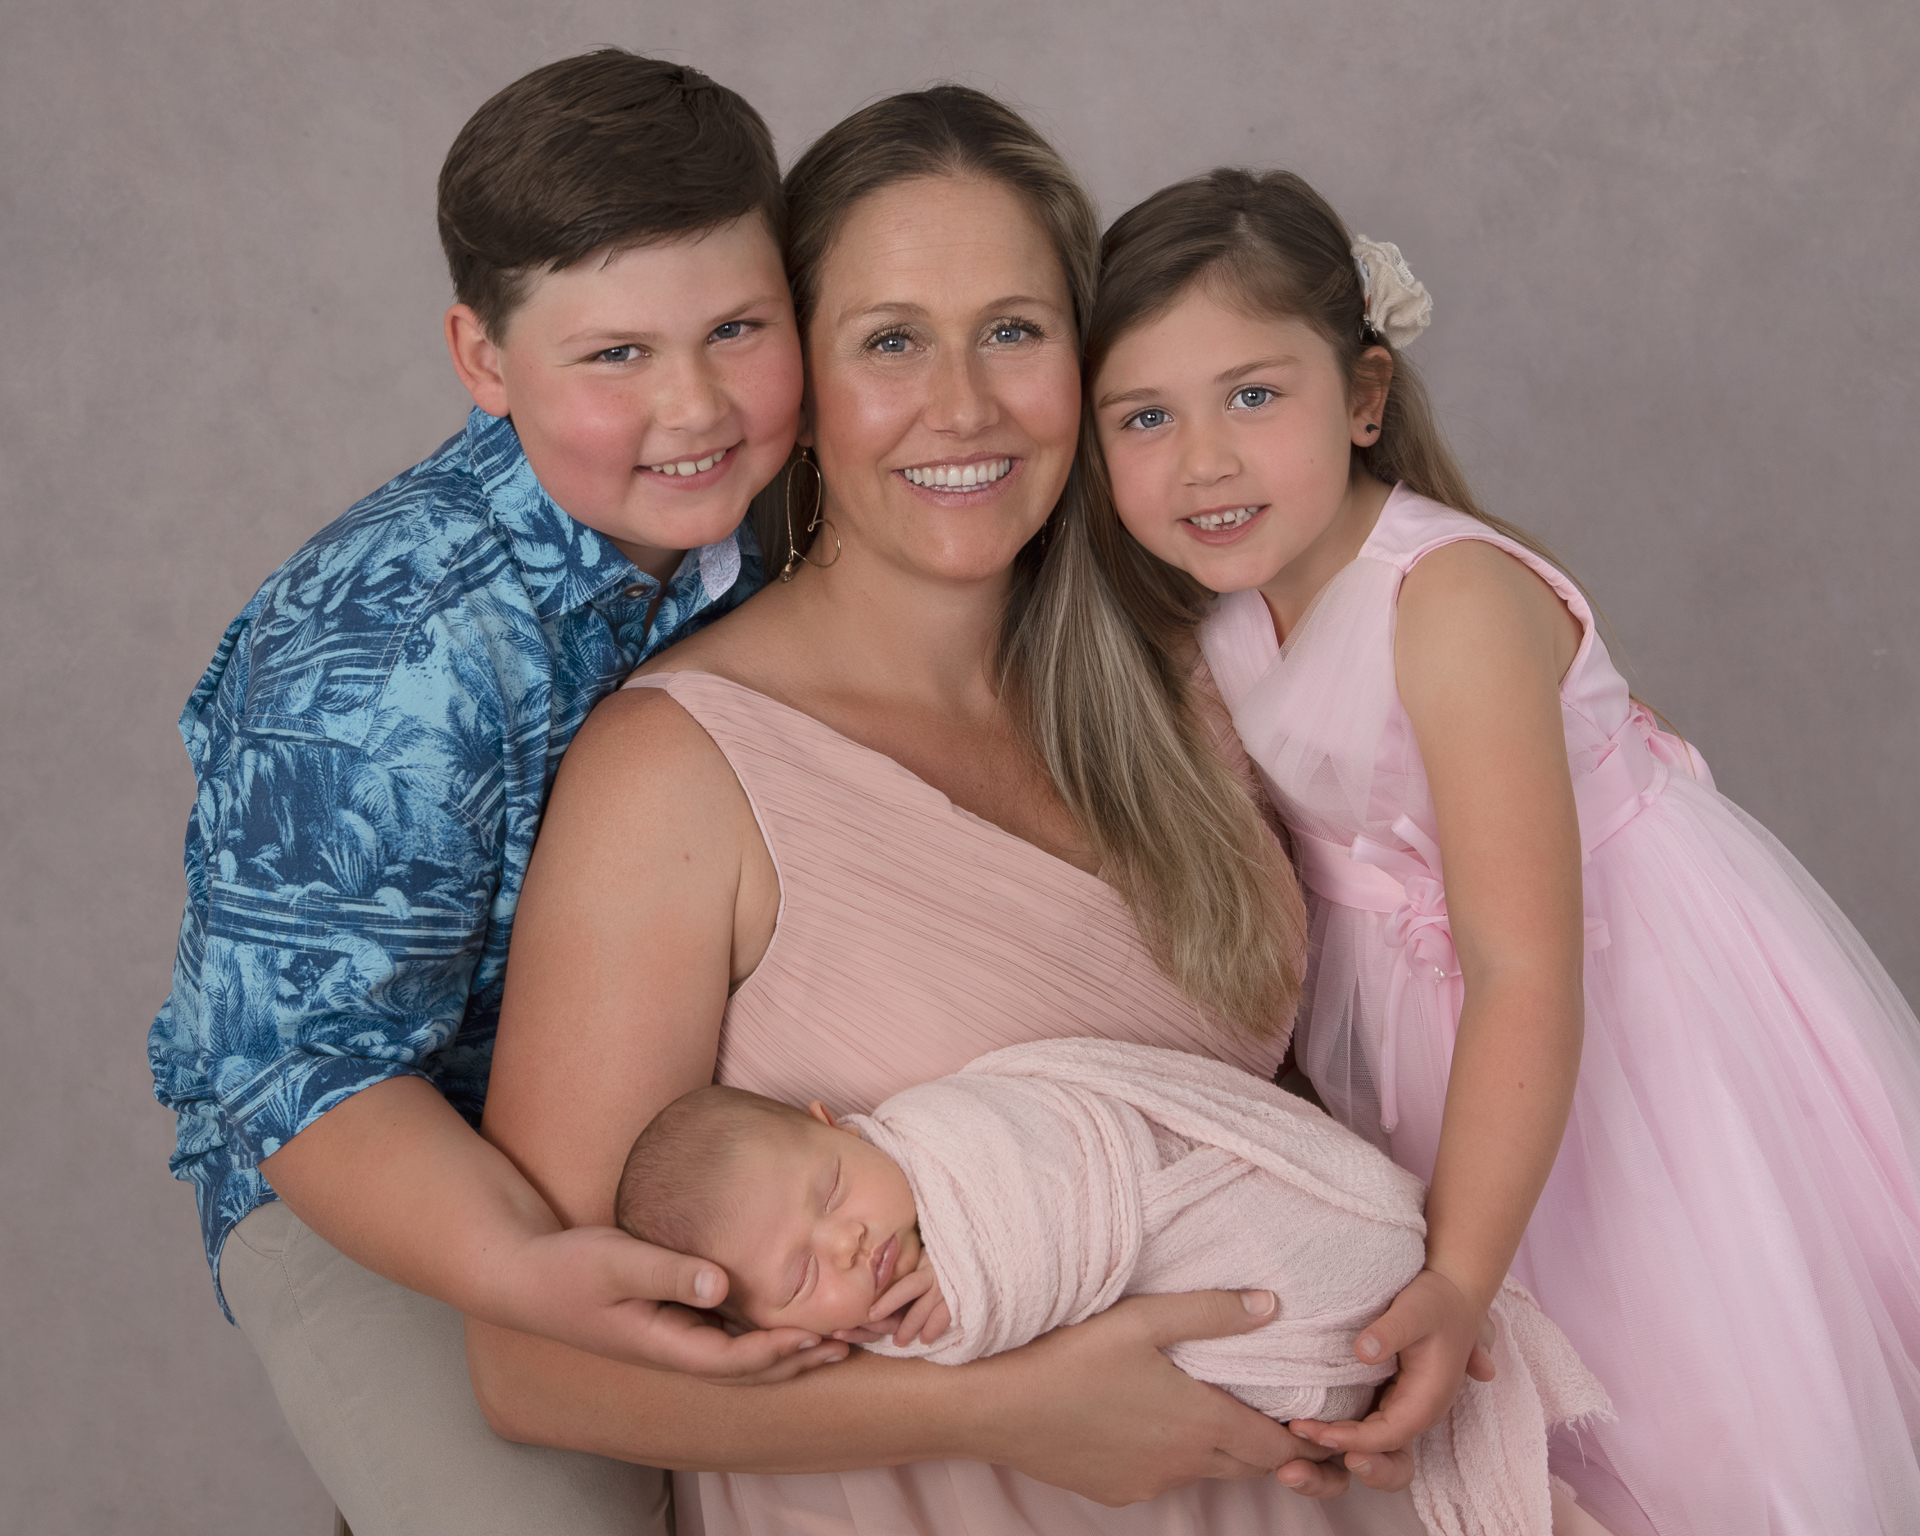 Mother posing indoors holding her newborn daughter, accompanied by her 2 older kids. Girls on pink, boy on blue outfit. Gray backdrop.